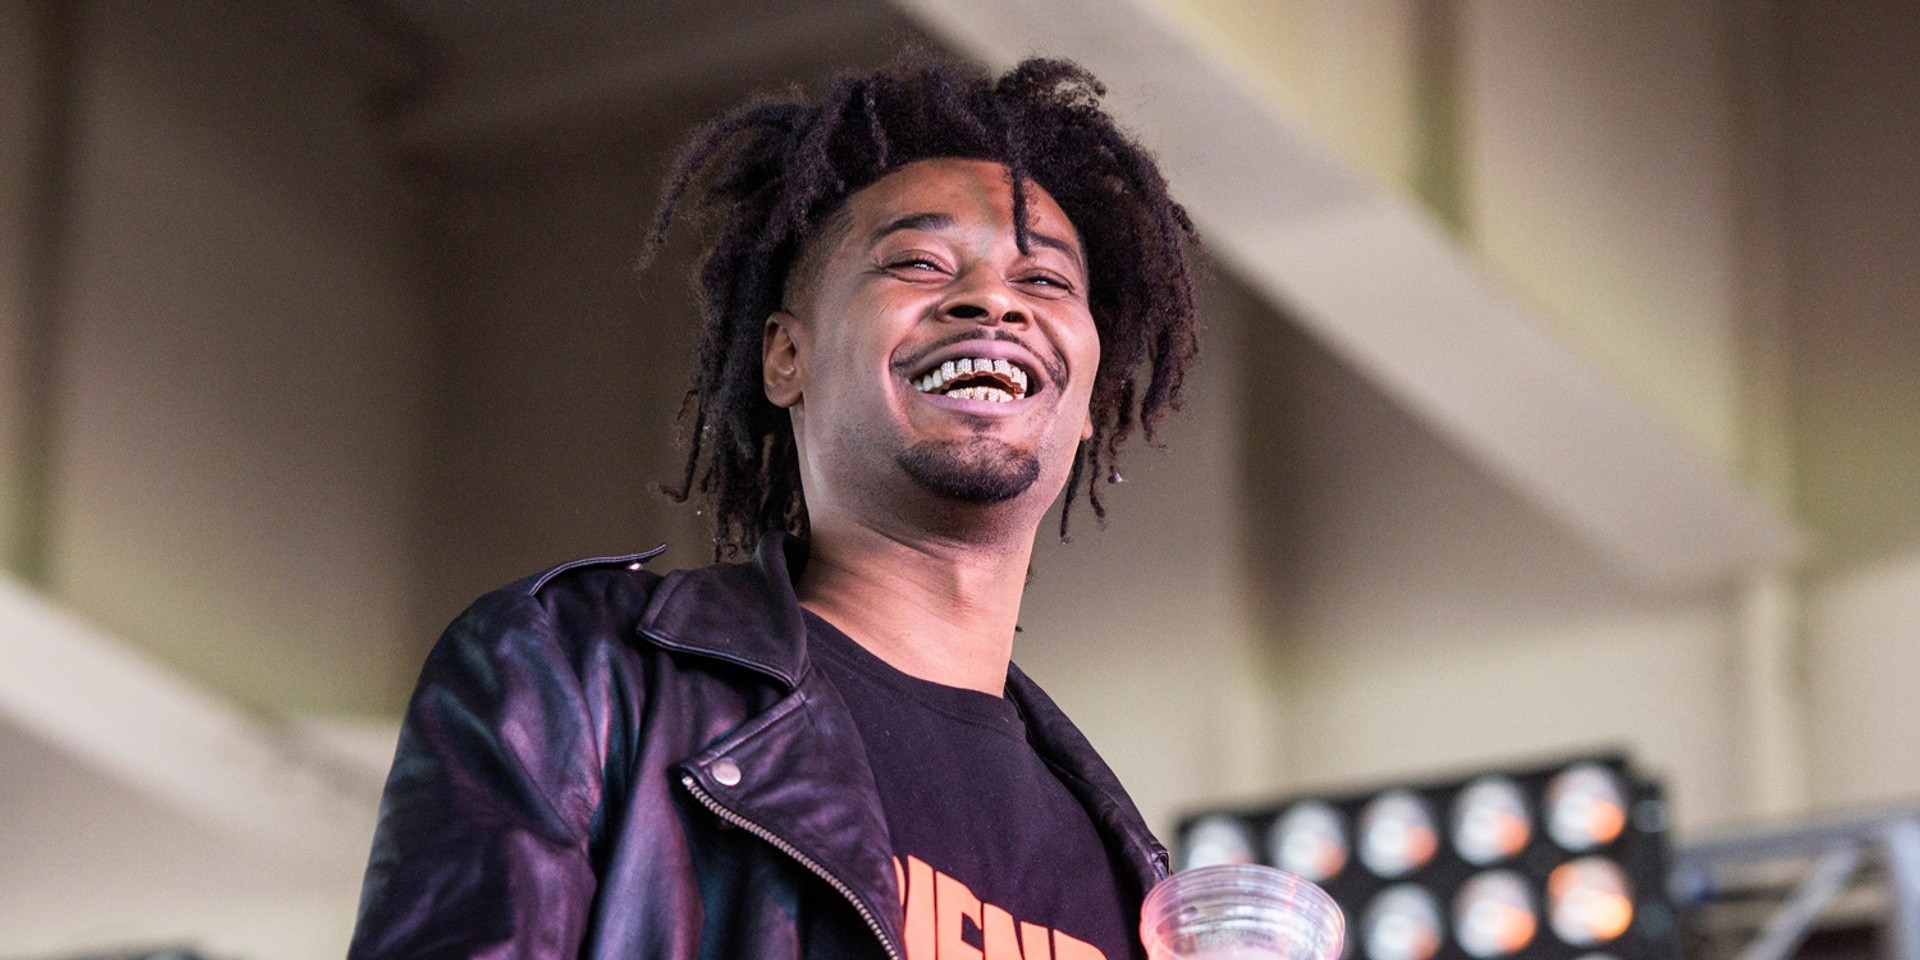 Danny Brown details upcoming album uknowhatimsayin¿, shares new song